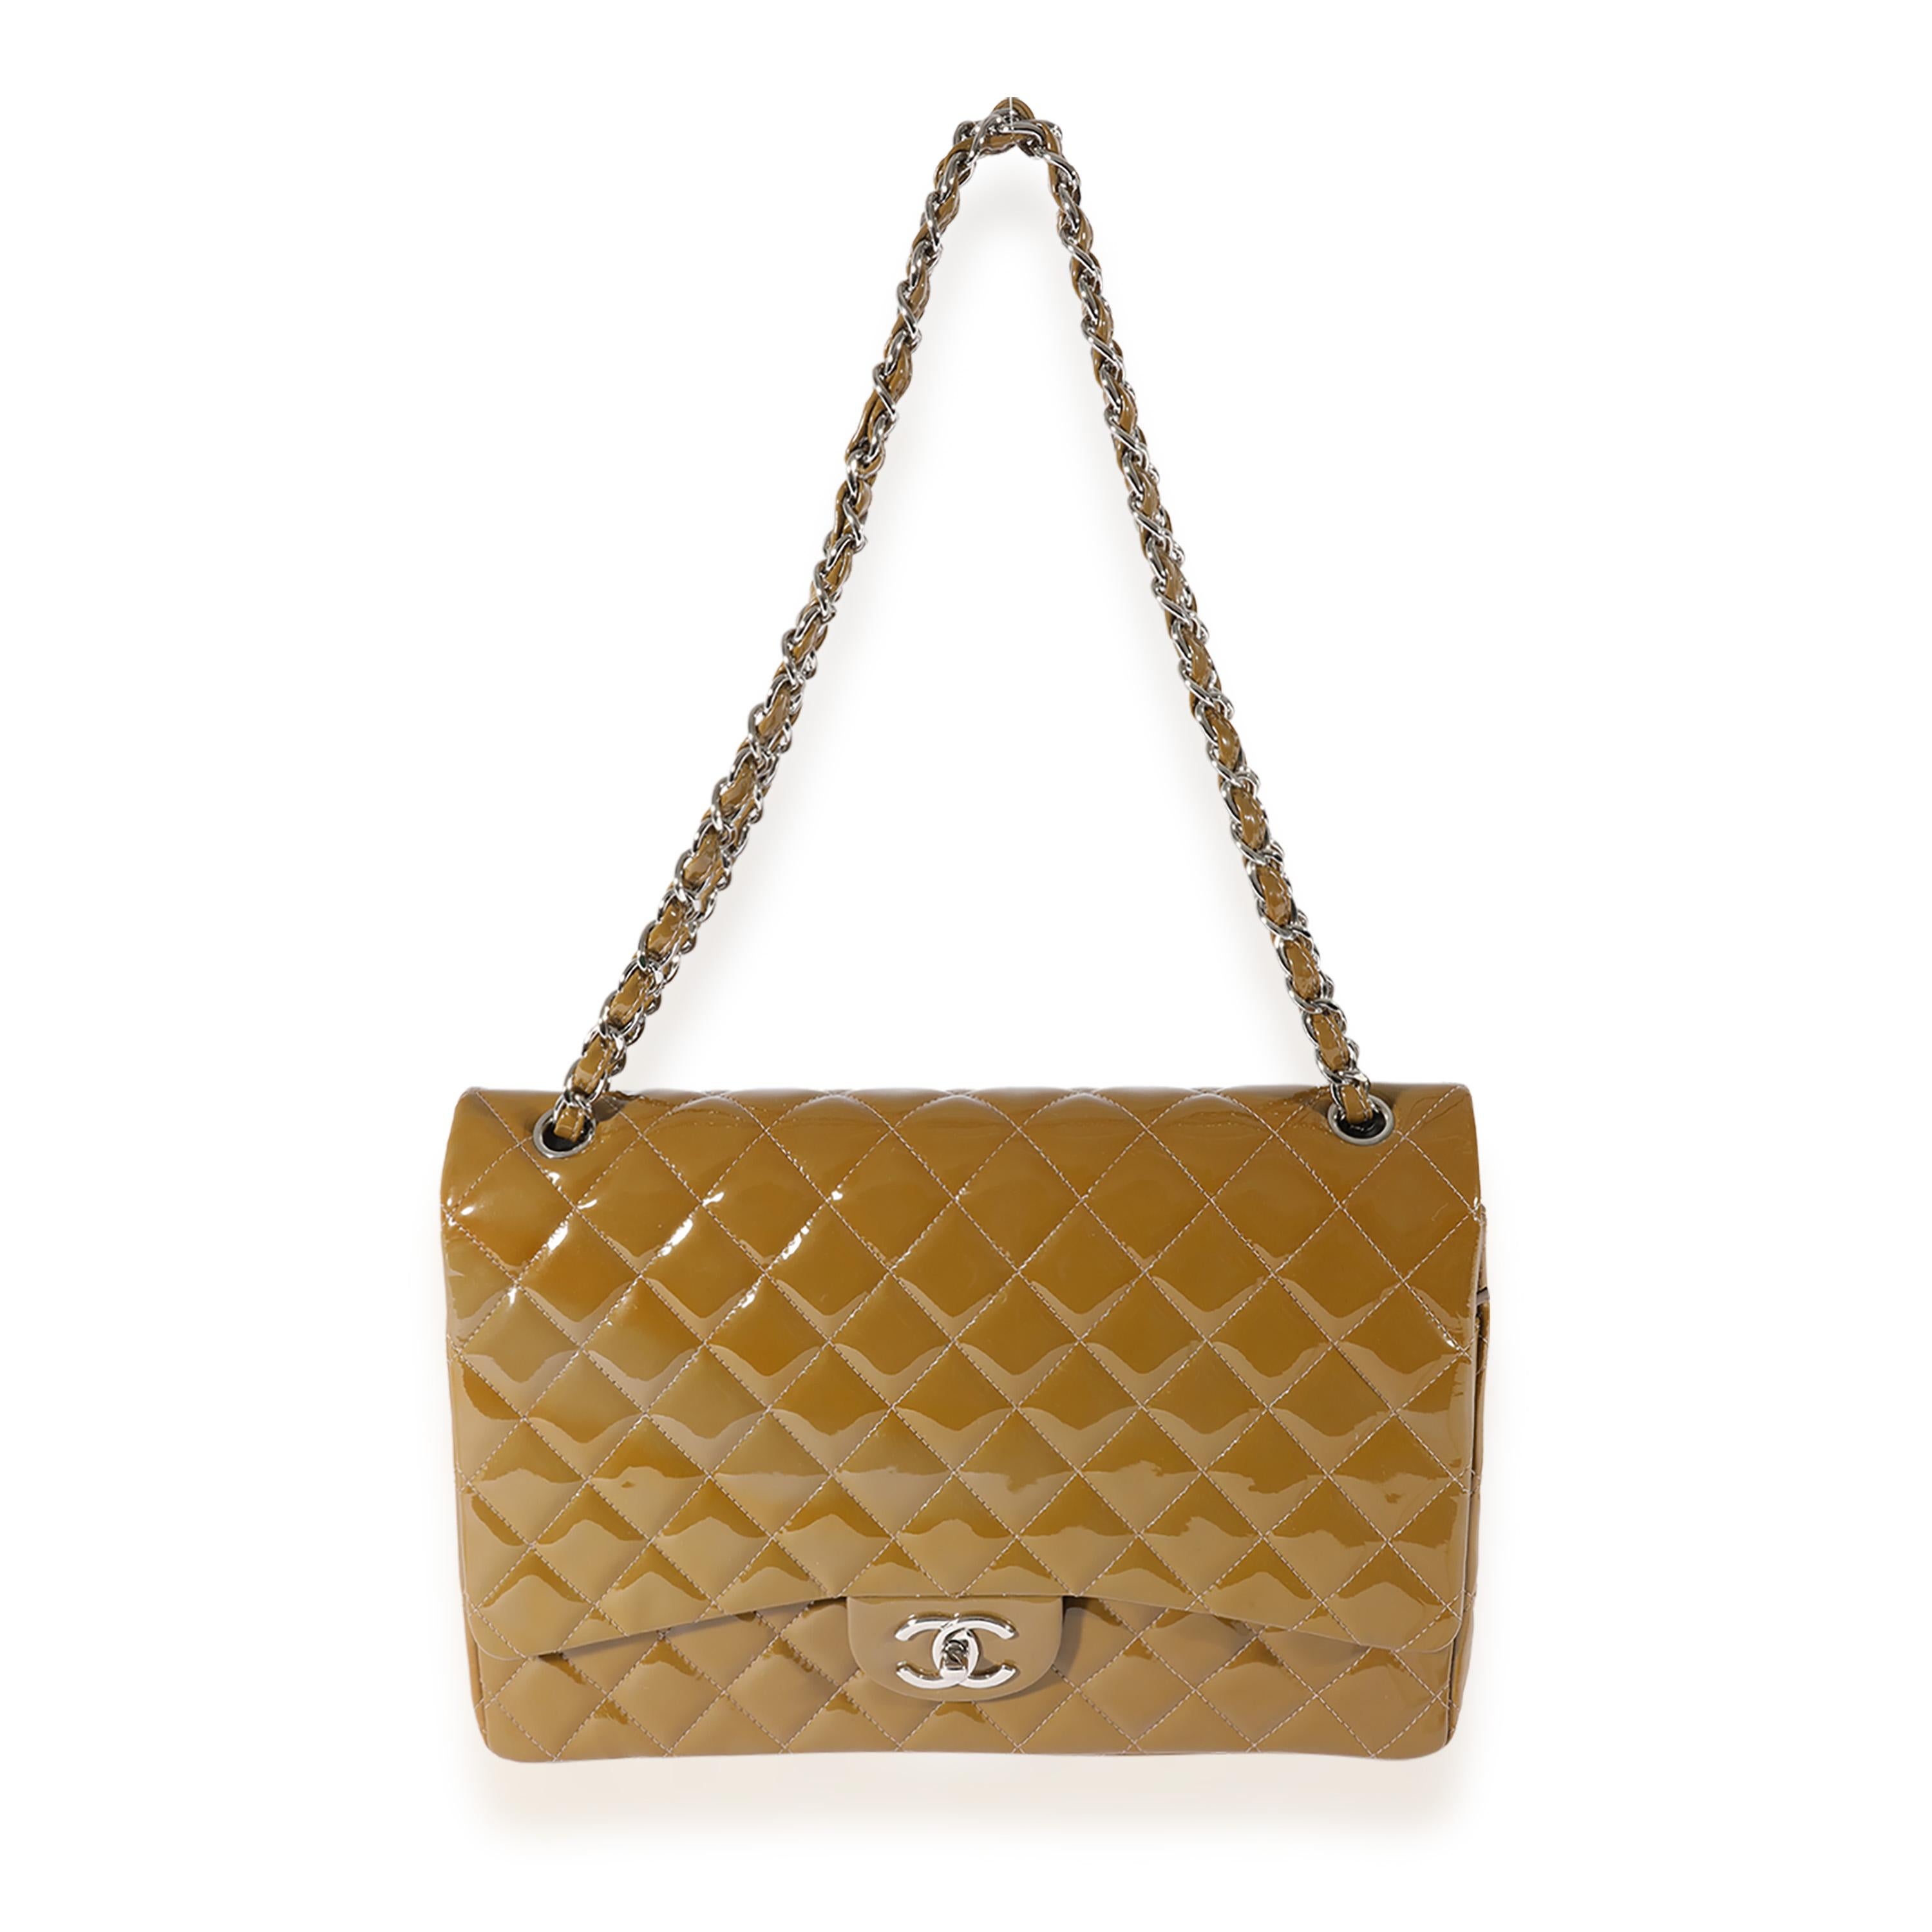 Listing Title: Chanel Tan Quilted Patent Leather Maxi Double Flap
SKU: 124893
Condition: Pre-owned 
Handbag Condition: Very Good
Condition Comments: Very Good Condition. Light discoloration, smudging, and marks to exterior. Scratching to hardware.